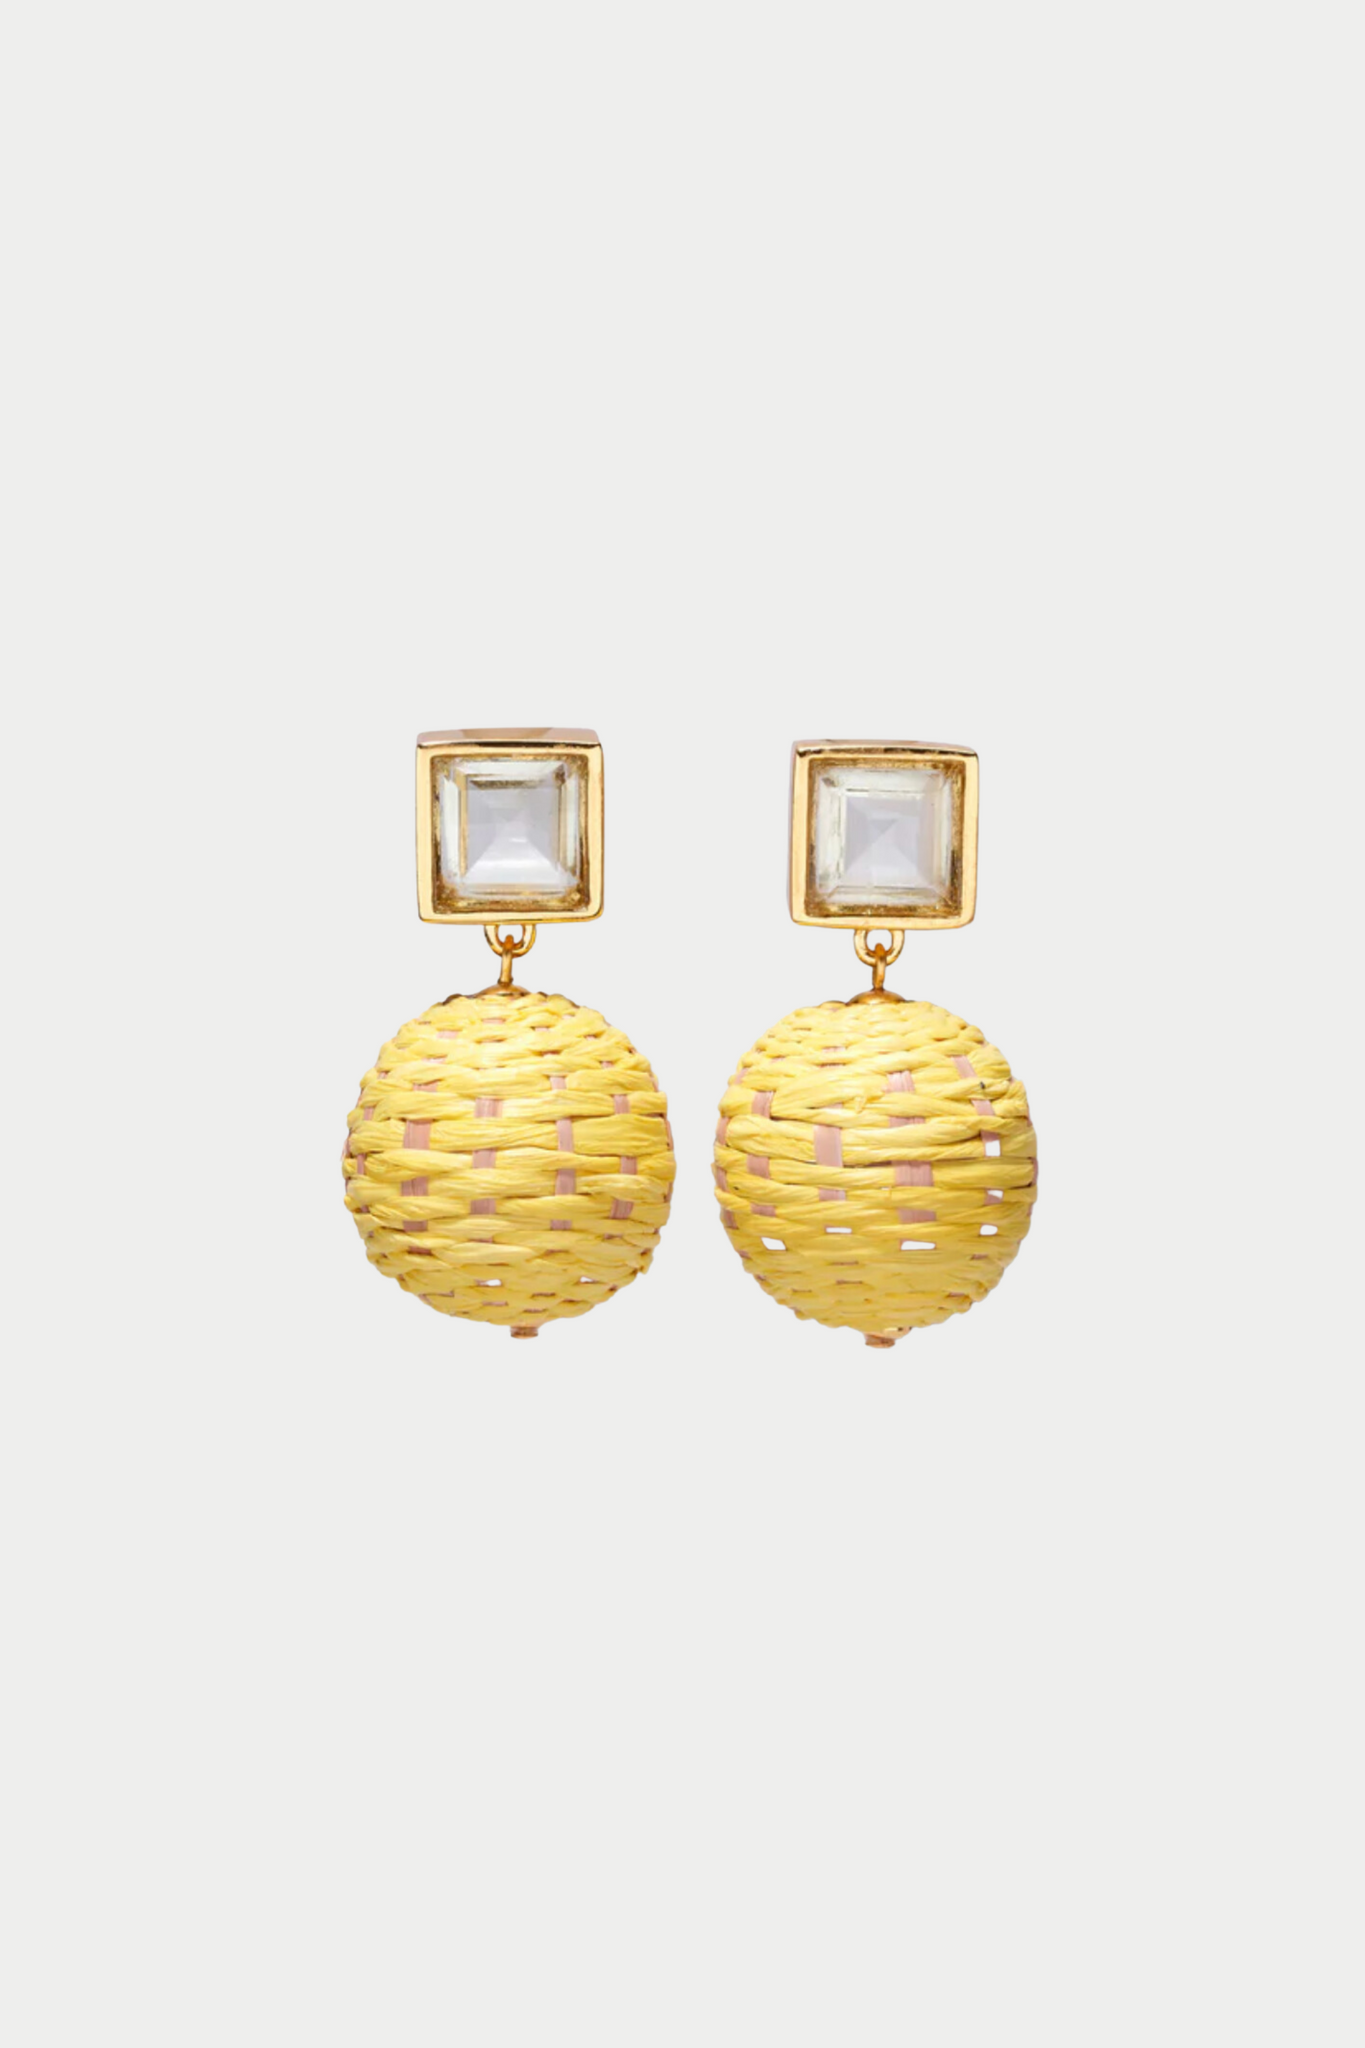 Lizzie Fortunato Jewels - Paradiso Earrings, Canary